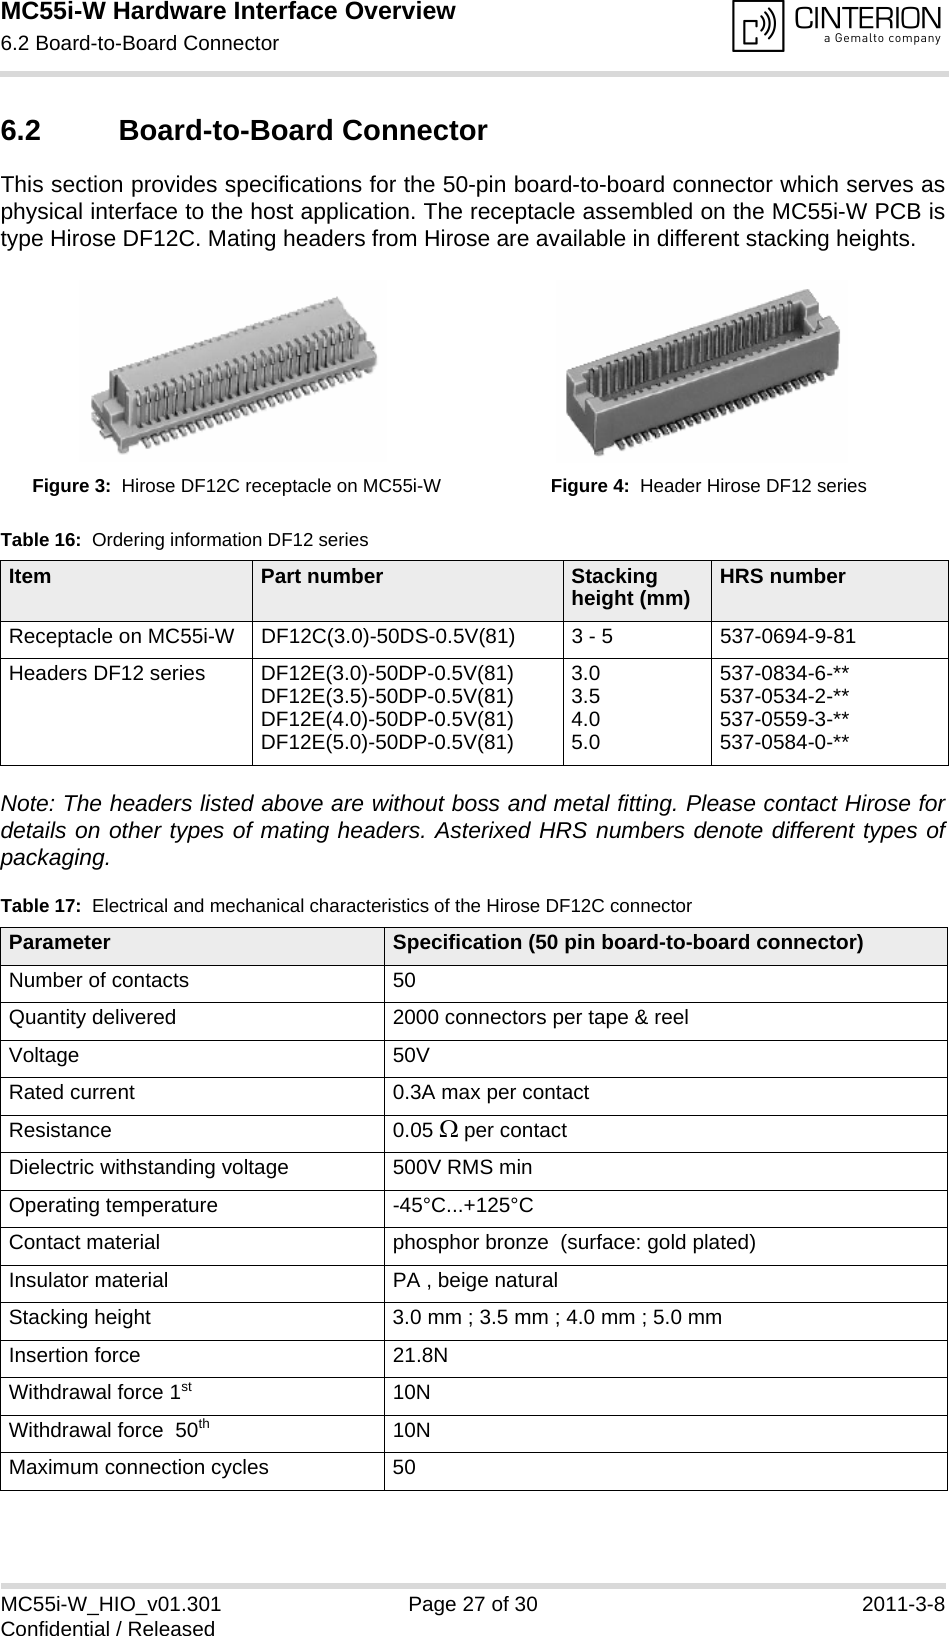 MC55i-W Hardware Interface Overview6.2 Board-to-Board Connector28MC55i-W_HIO_v01.301 Page 27 of 30 2011-3-8Confidential / Released6.2 Board-to-Board ConnectorThis section provides specifications for the 50-pin board-to-board connector which serves asphysical interface to the host application. The receptacle assembled on the MC55i-W PCB istype Hirose DF12C. Mating headers from Hirose are available in different stacking heights. Note: The headers listed above are without boss and metal fitting. Please contact Hirose fordetails on other types of mating headers. Asterixed HRS numbers denote different types ofpackaging. Figure 3:  Hirose DF12C receptacle on MC55i-W Figure 4:  Header Hirose DF12 seriesTable 16:  Ordering information DF12 seriesItem Part number  Stacking height (mm) HRS numberReceptacle on MC55i-W DF12C(3.0)-50DS-0.5V(81) 3 - 5 537-0694-9-81Headers DF12 series DF12E(3.0)-50DP-0.5V(81)DF12E(3.5)-50DP-0.5V(81)DF12E(4.0)-50DP-0.5V(81)DF12E(5.0)-50DP-0.5V(81)3.03.54.05.0537-0834-6-**537-0534-2-**537-0559-3-**537-0584-0-**Table 17:  Electrical and mechanical characteristics of the Hirose DF12C connectorParameter Specification (50 pin board-to-board connector)Number of contacts 50Quantity delivered 2000 connectors per tape &amp; reelVoltage 50VRated current 0.3A max per contactResistance 0.05  per contactDielectric withstanding voltage 500V RMS minOperating temperature -45°C...+125°CContact material phosphor bronze  (surface: gold plated)Insulator material PA , beige naturalStacking height 3.0 mm ; 3.5 mm ; 4.0 mm ; 5.0 mmInsertion force 21.8NWithdrawal force 1st 10NWithdrawal force  50th 10NMaximum connection cycles 50